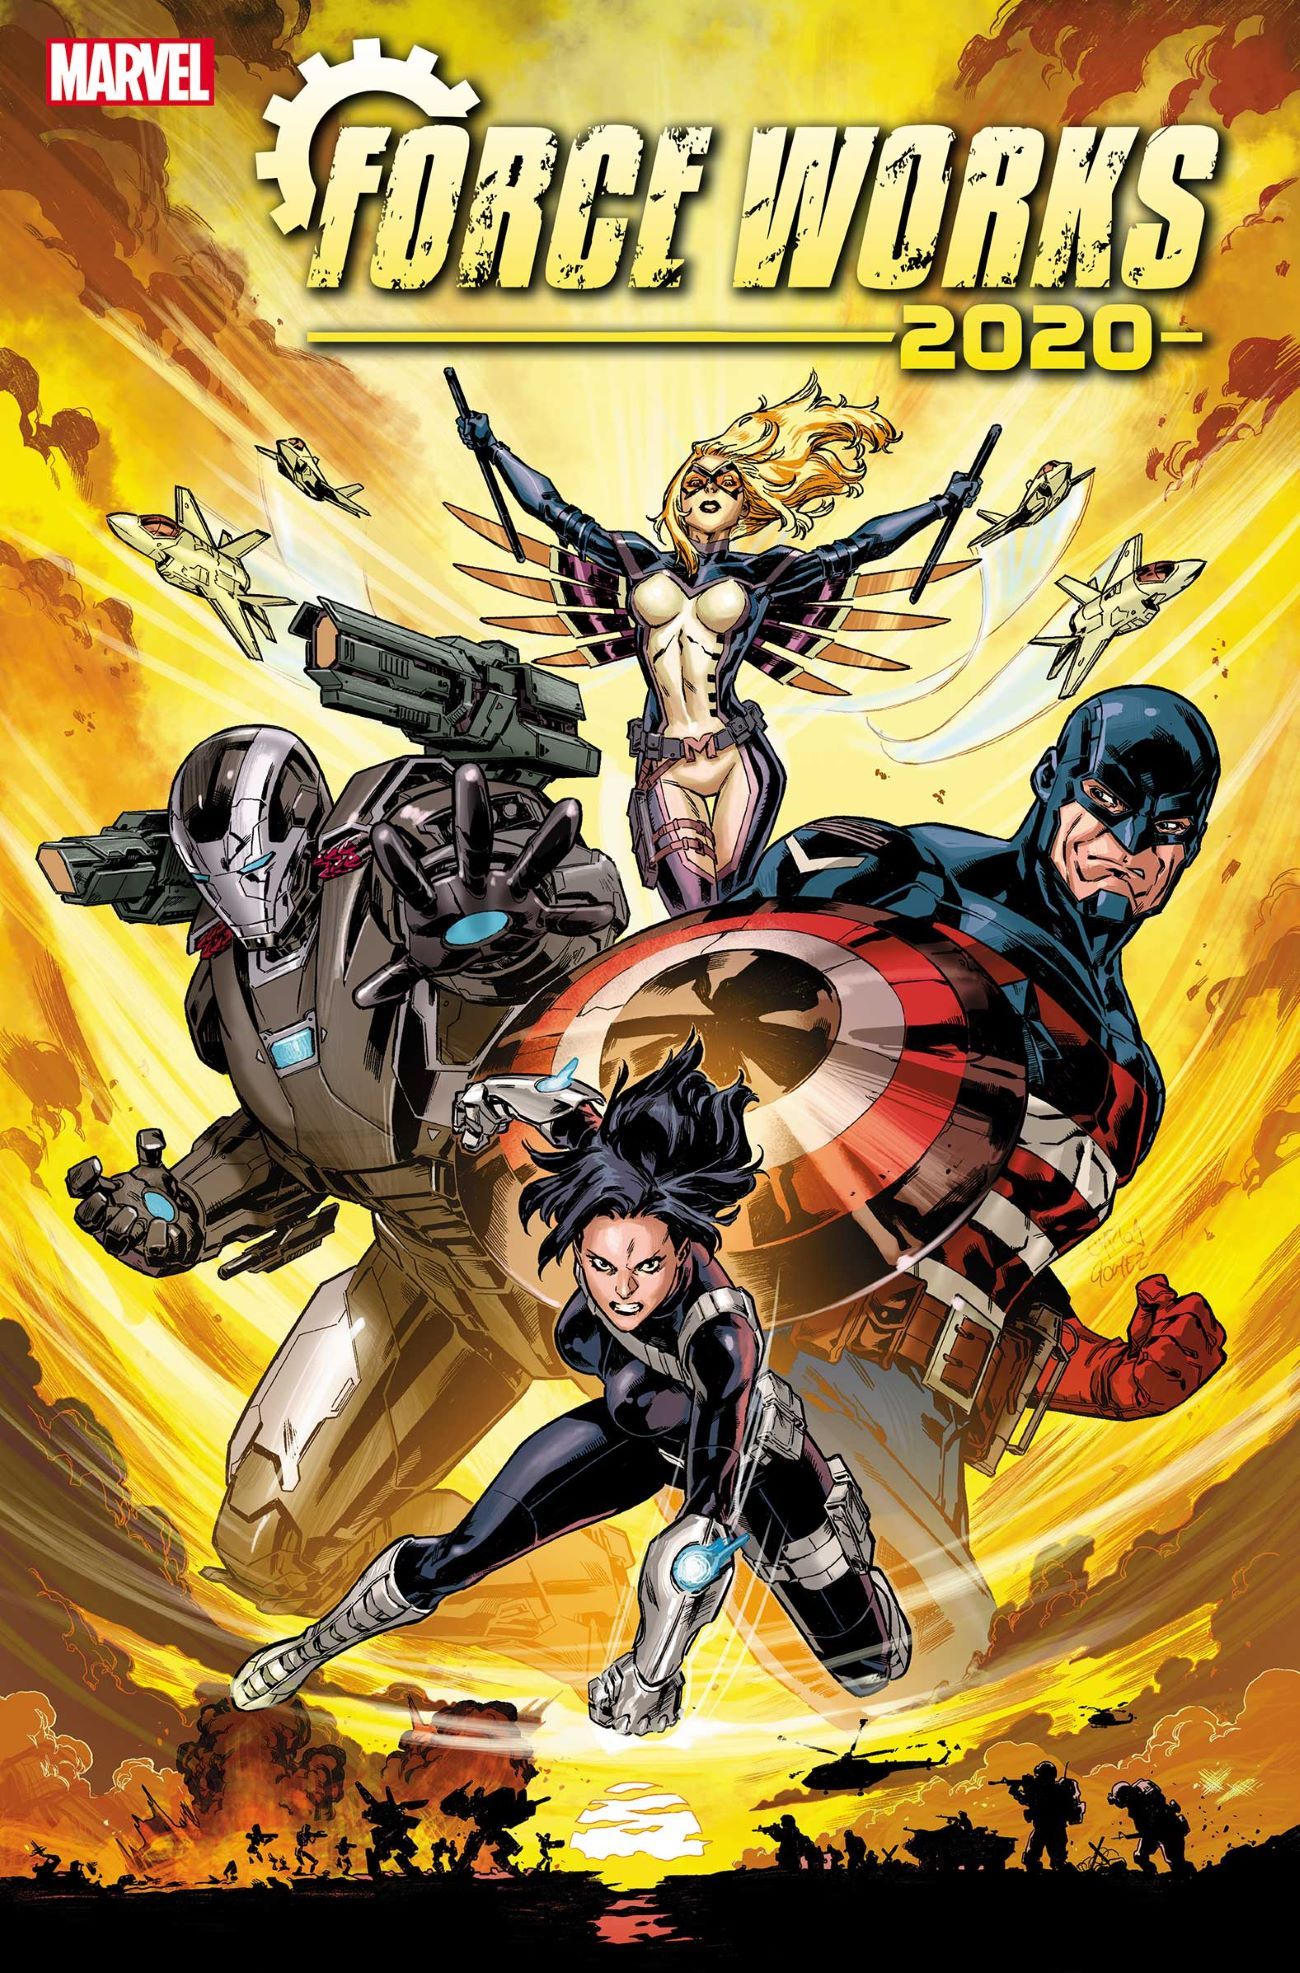 Marvel Force Works 2020 Comic Cover